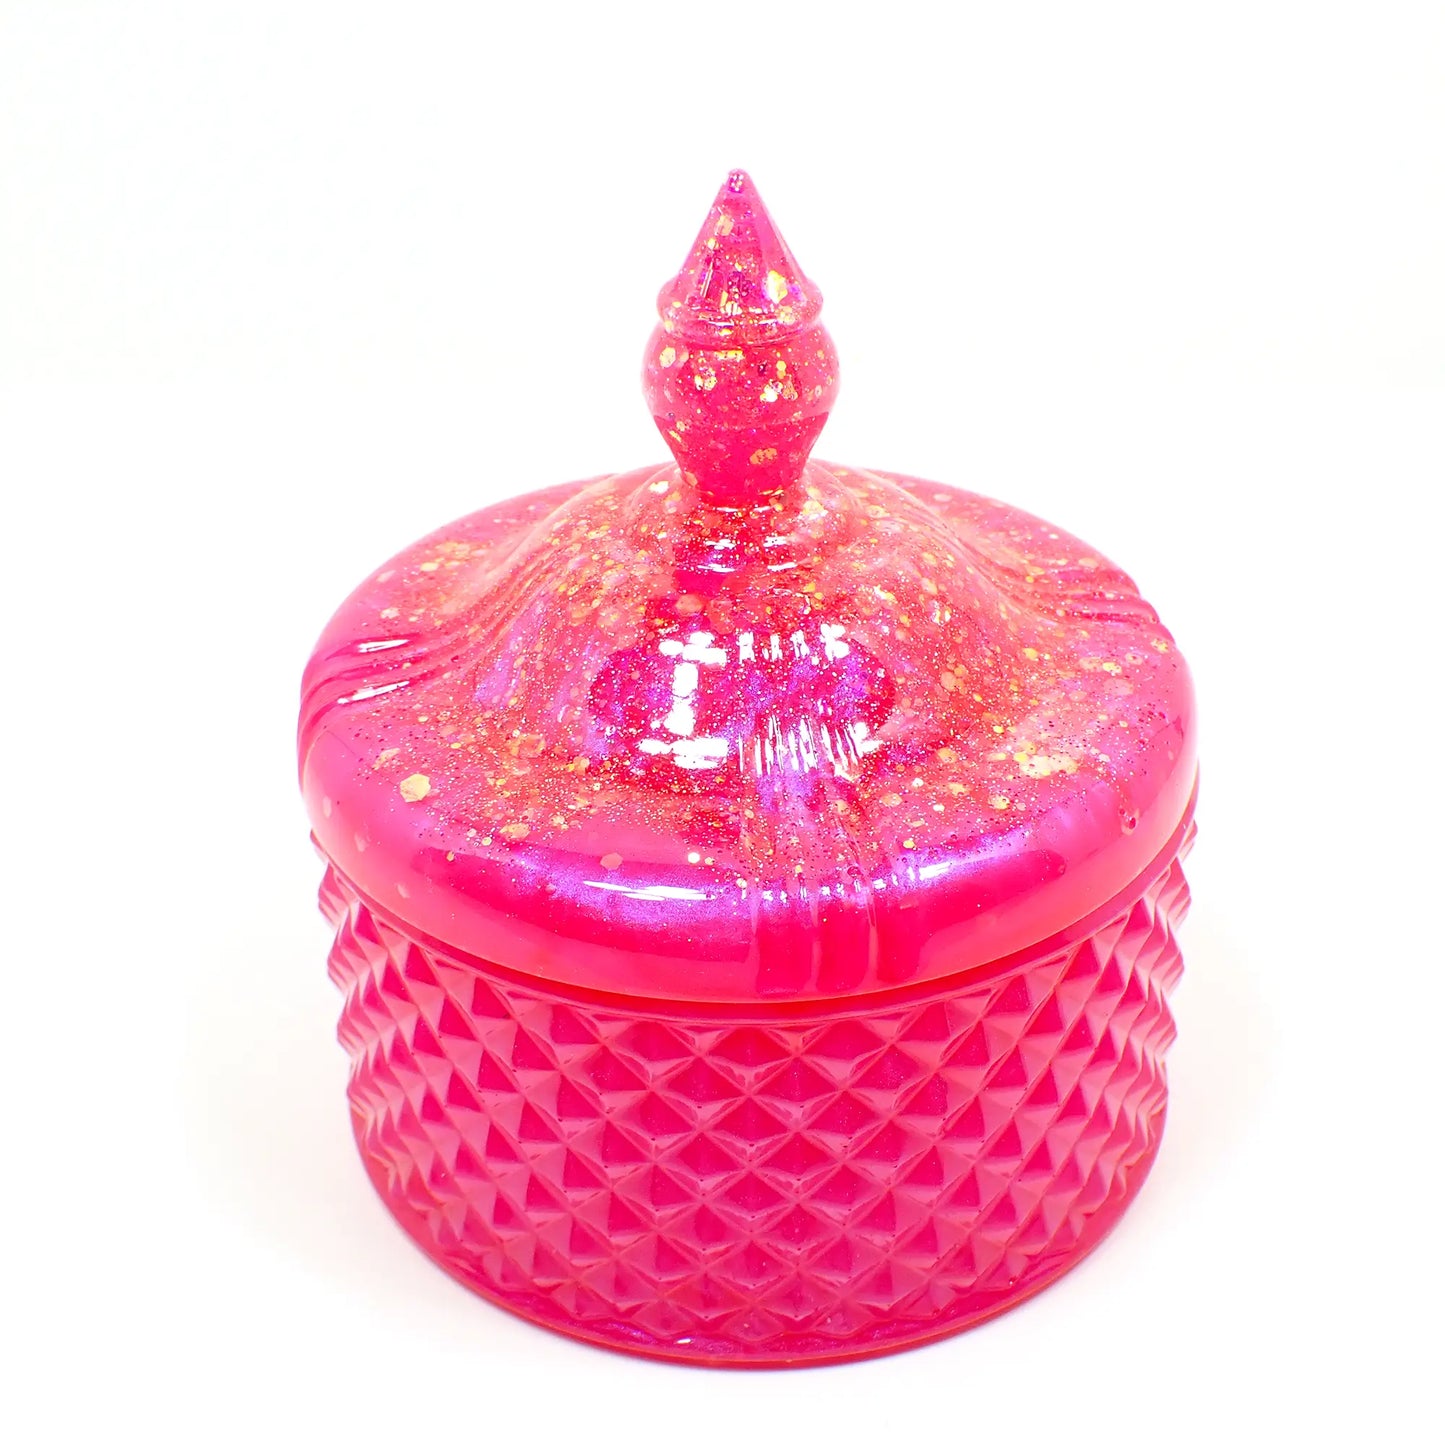 Side view of the handmade large trinket candy dish. It has pearly pink resin with chunky iridescent glitter on the lid. The bottom part is a bright pearly pink color.